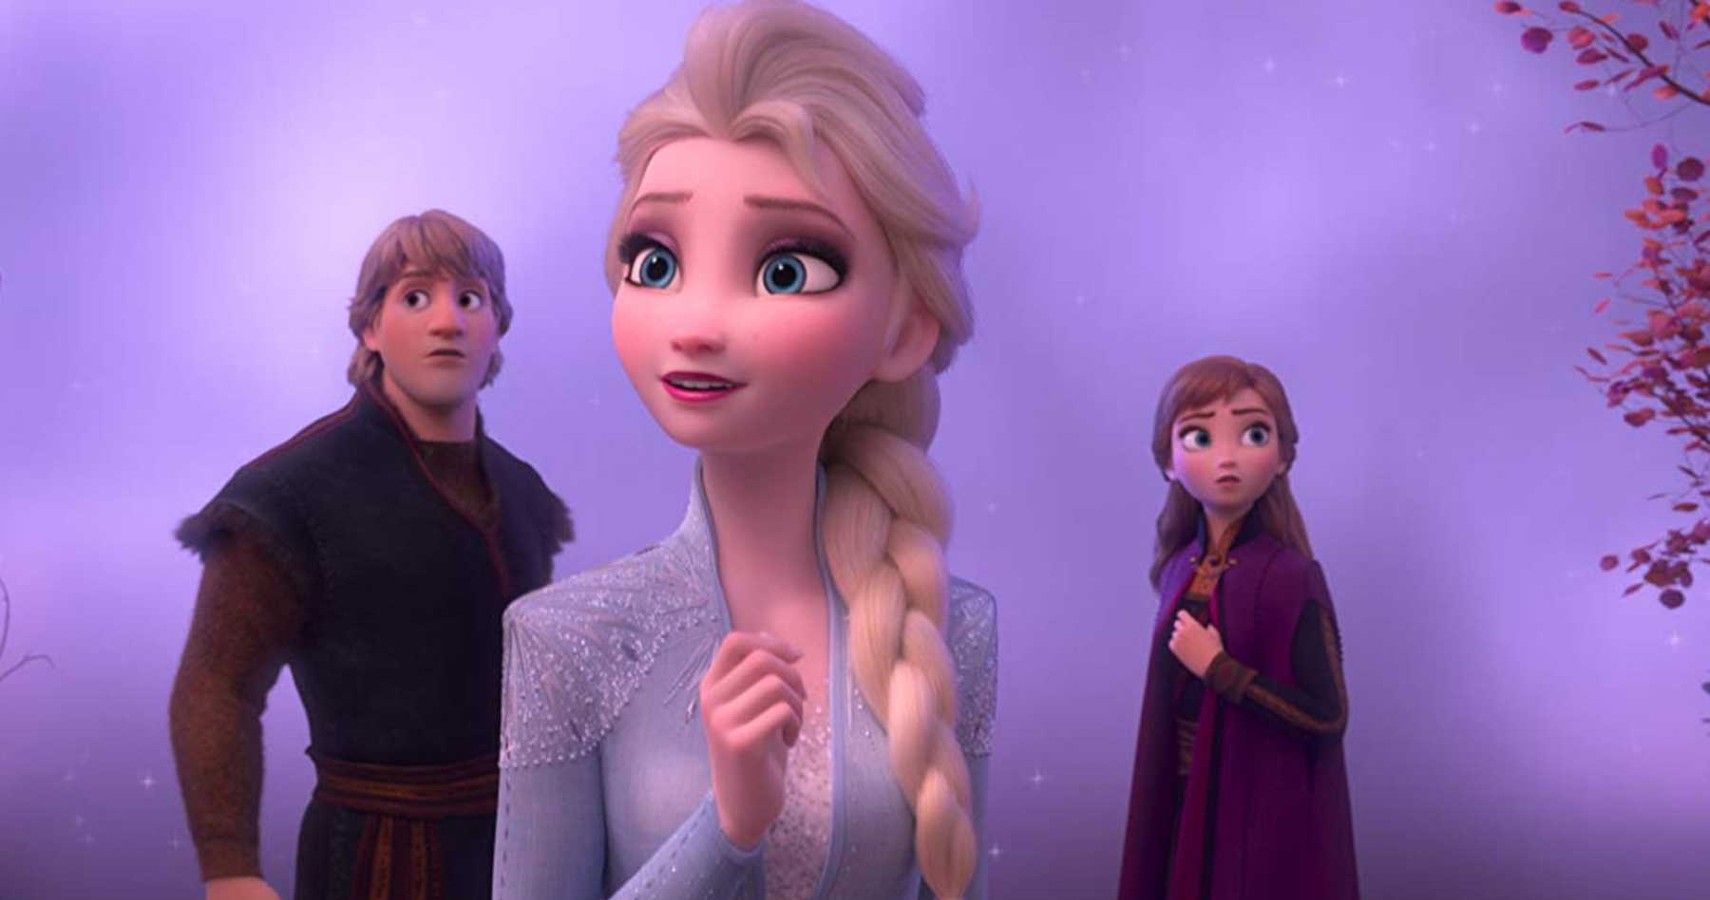 Disney 5 Greatest Quotes From Frozen (& 5 From Frozen 2)